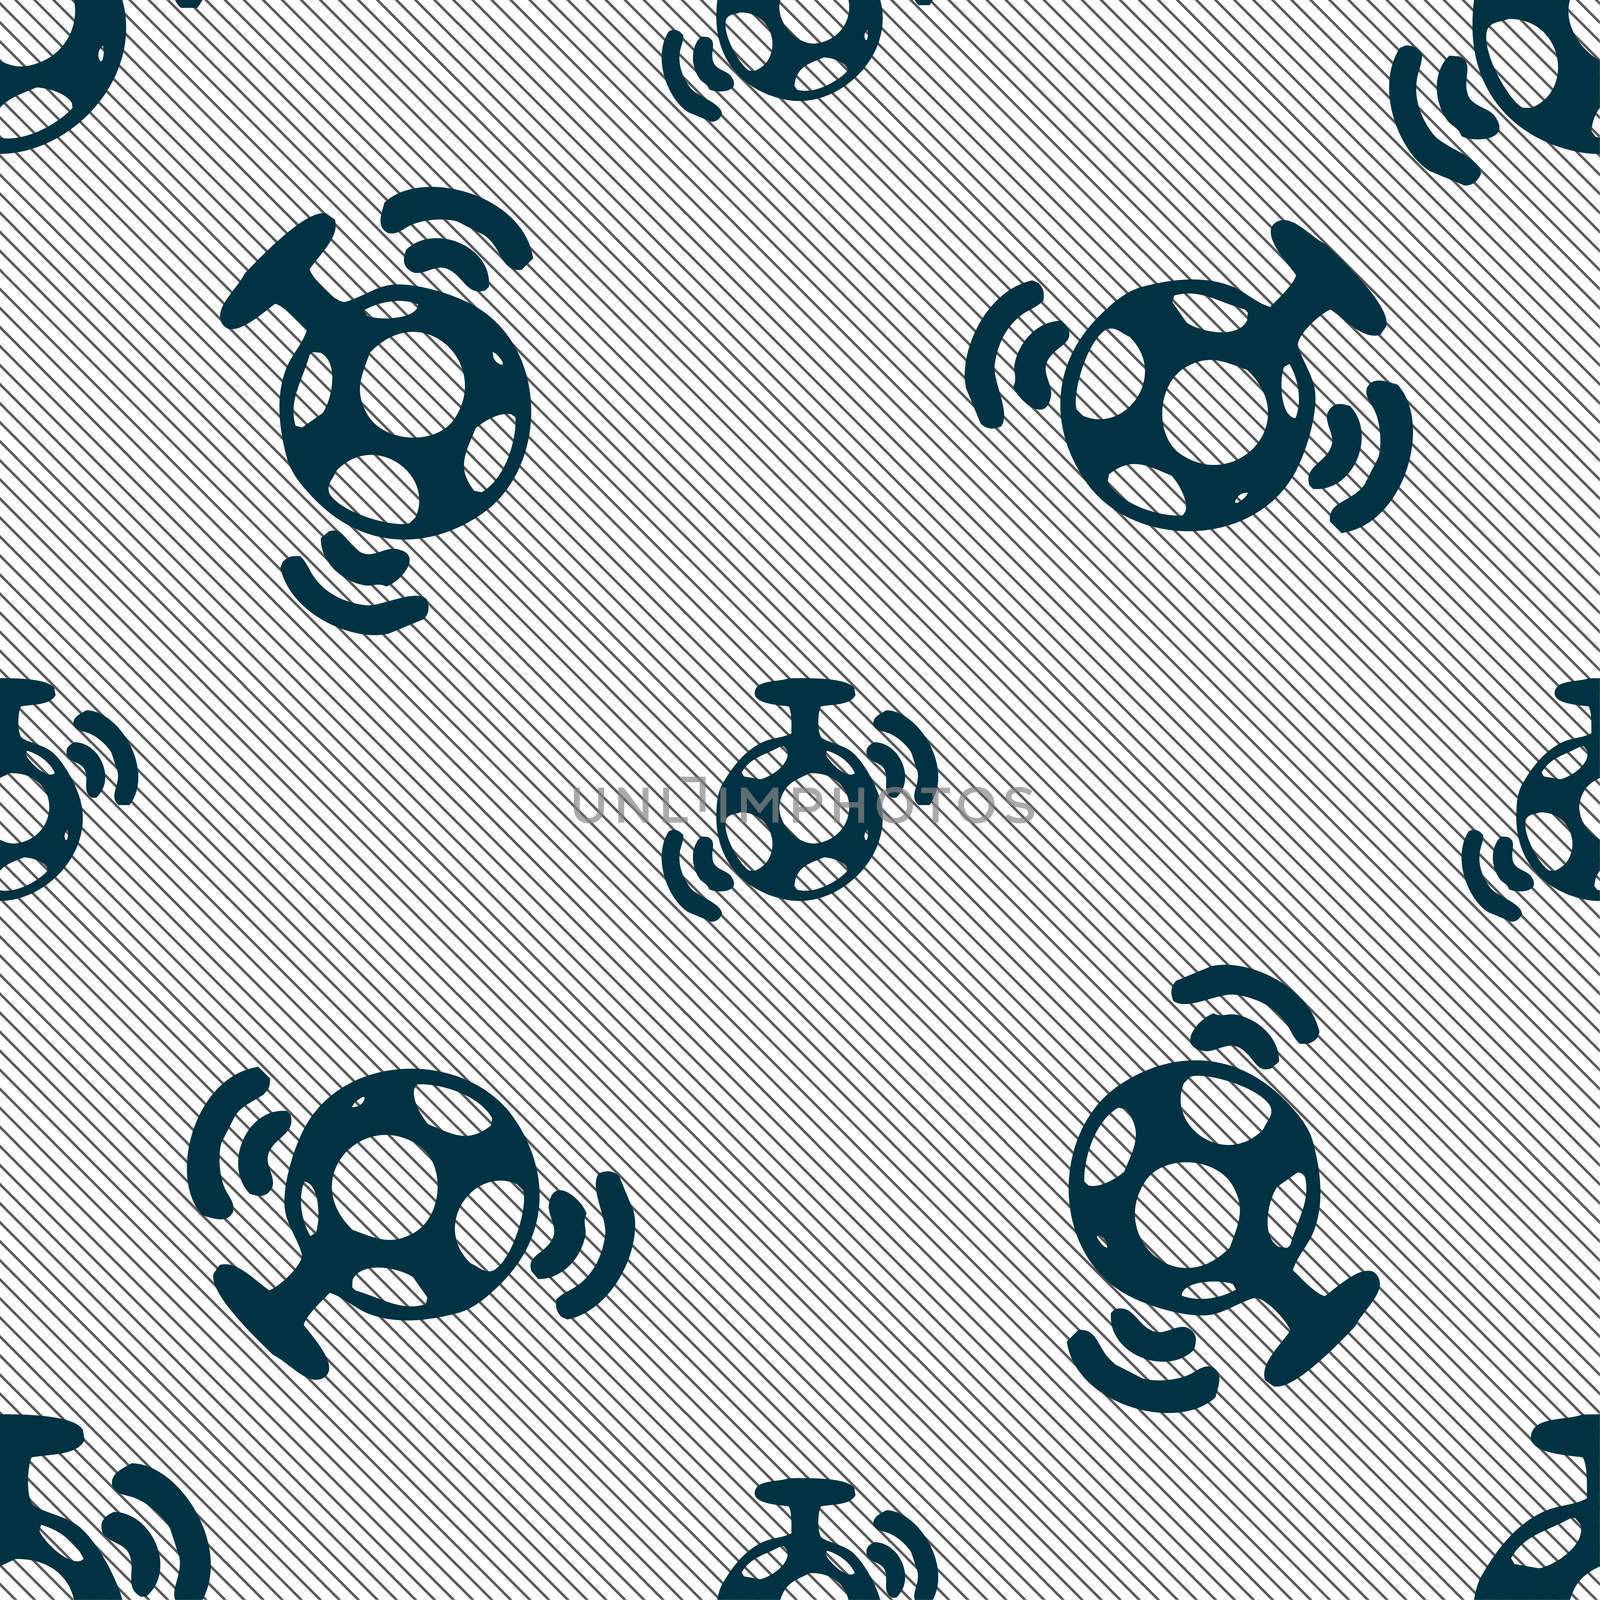 mirror ball disco icon sign. Seamless pattern with geometric texture. illustration